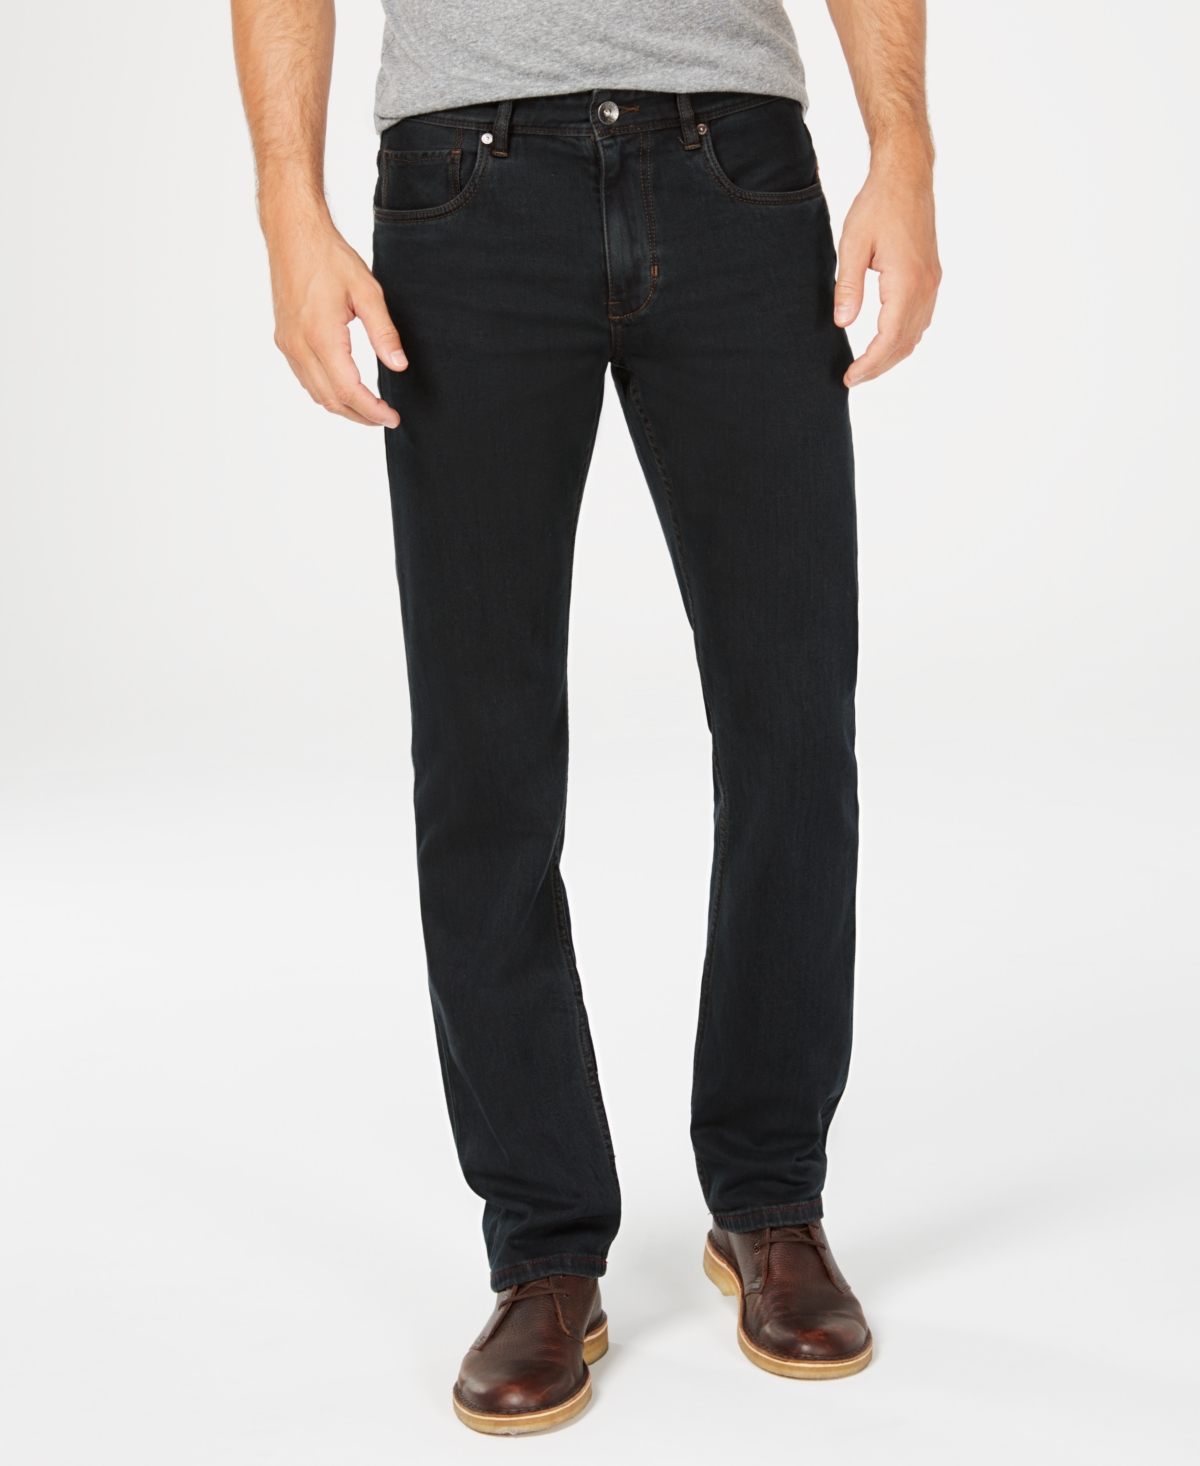 UPC 719260422490 product image for Tommy Bahama Men's Antigua Cove Authentic Fit Jeans | upcitemdb.com